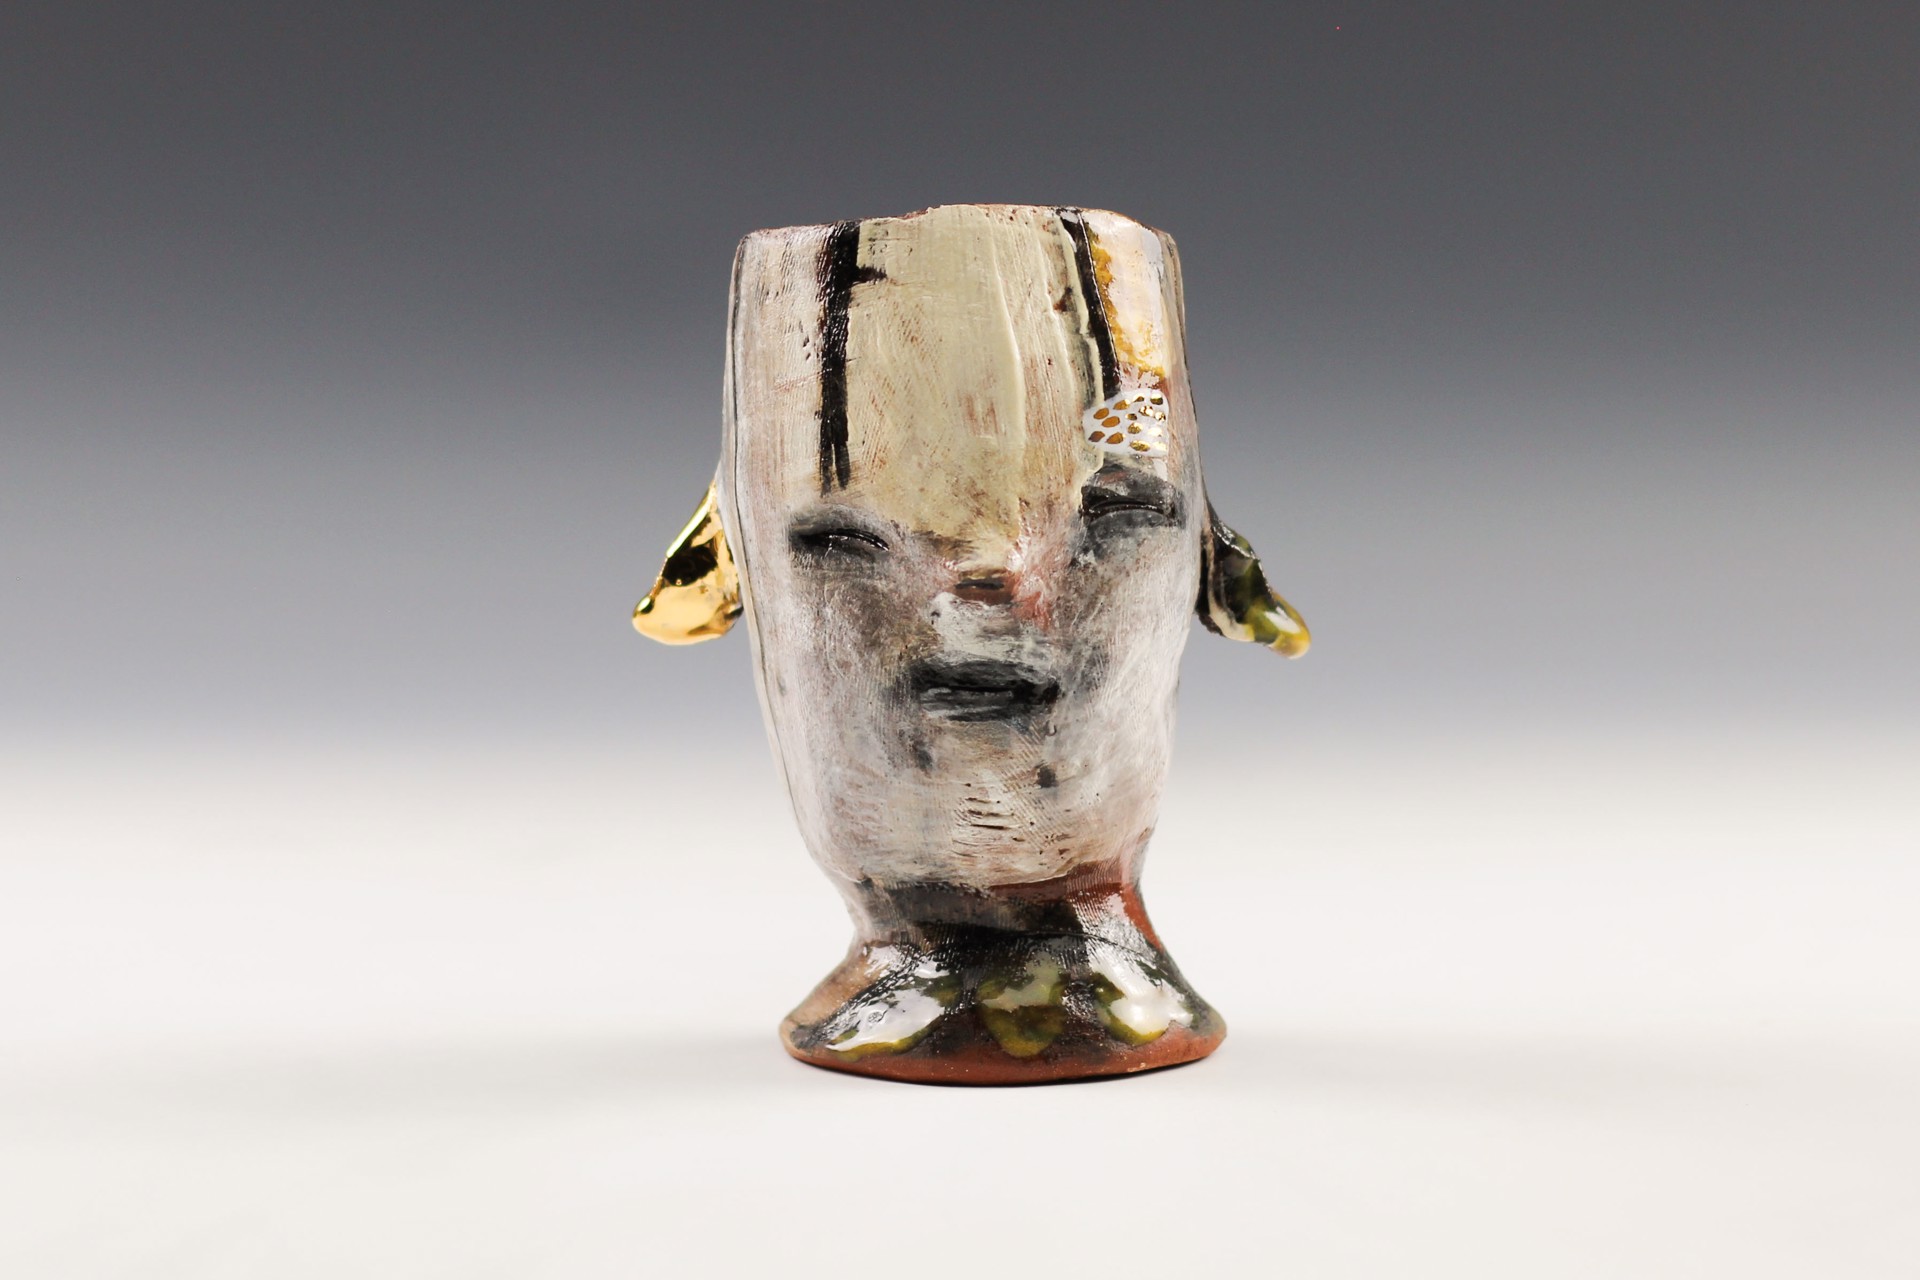 Cup by Stacey Johnson Hardy